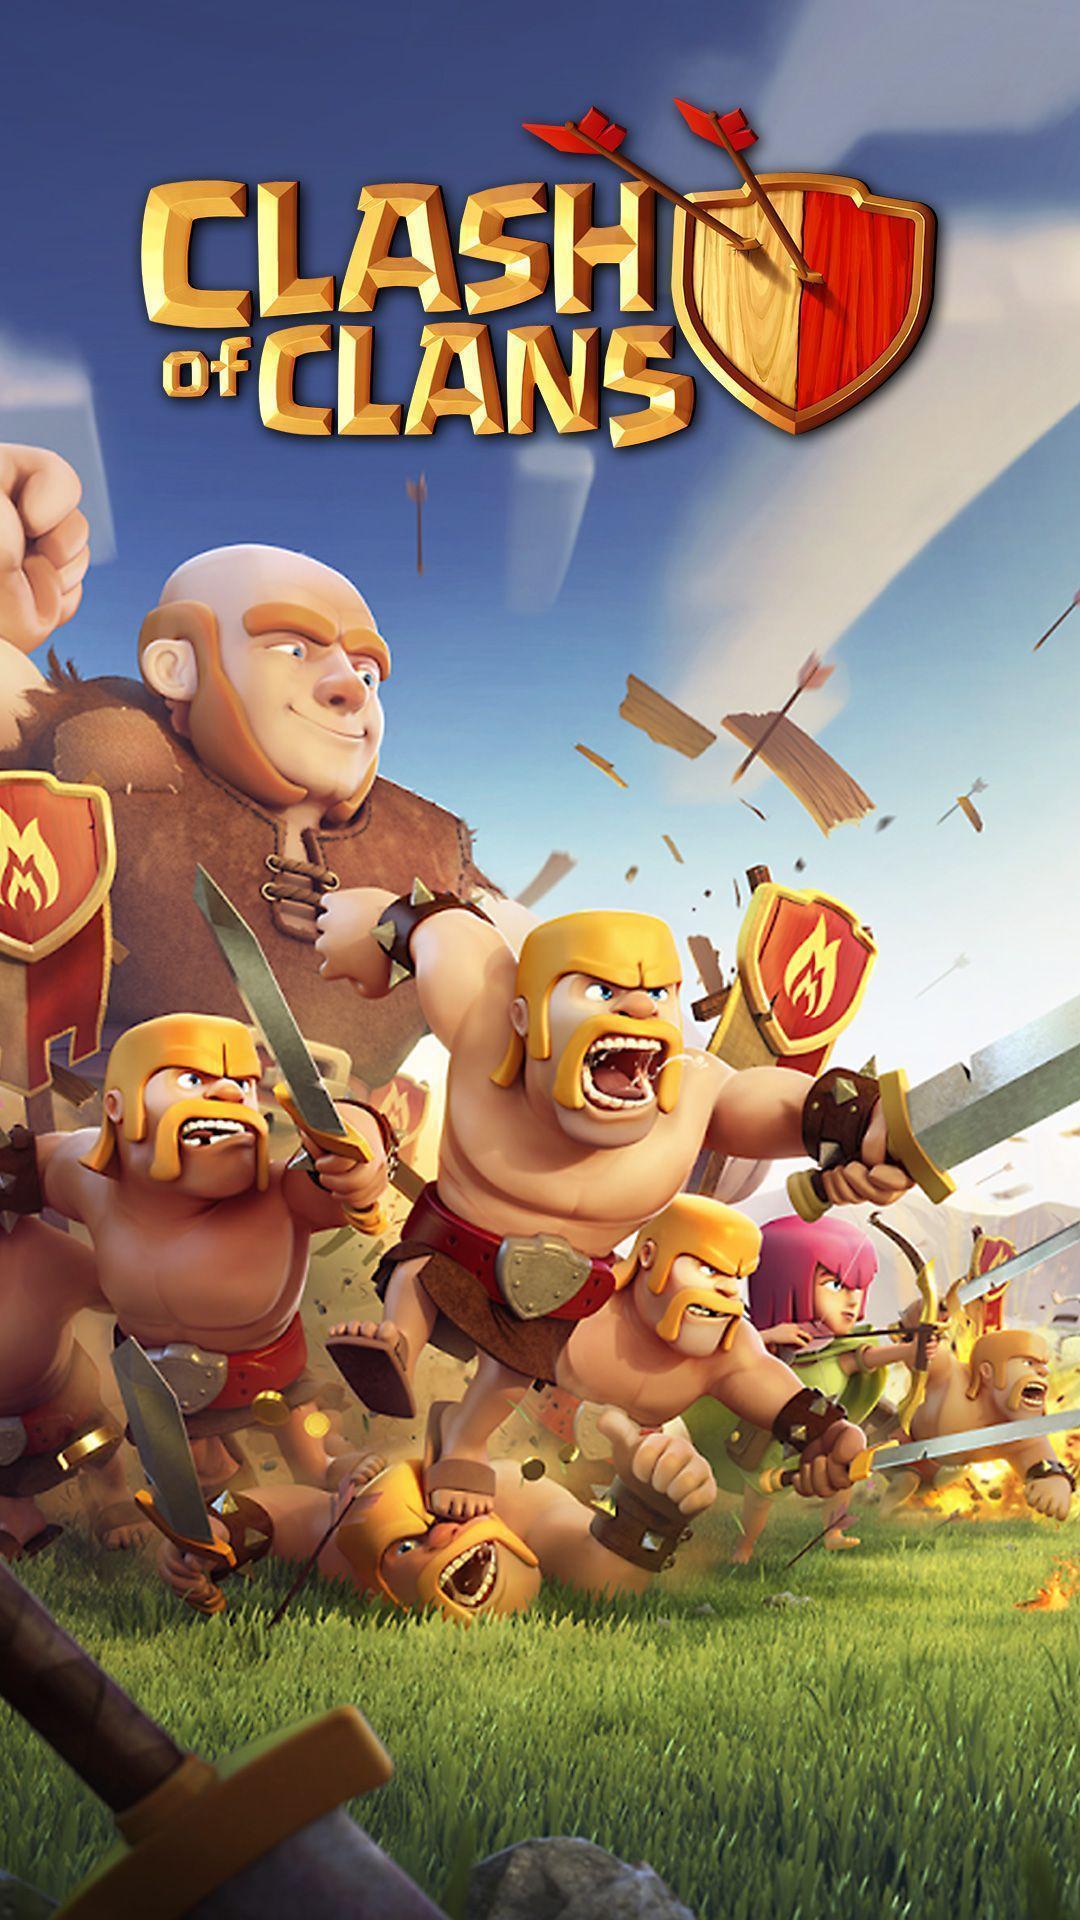 Clans of clans download. Клэш оф кланс. Игра игра Clash of Clans. 2 Игра Clash of Clans. Clan Clan.